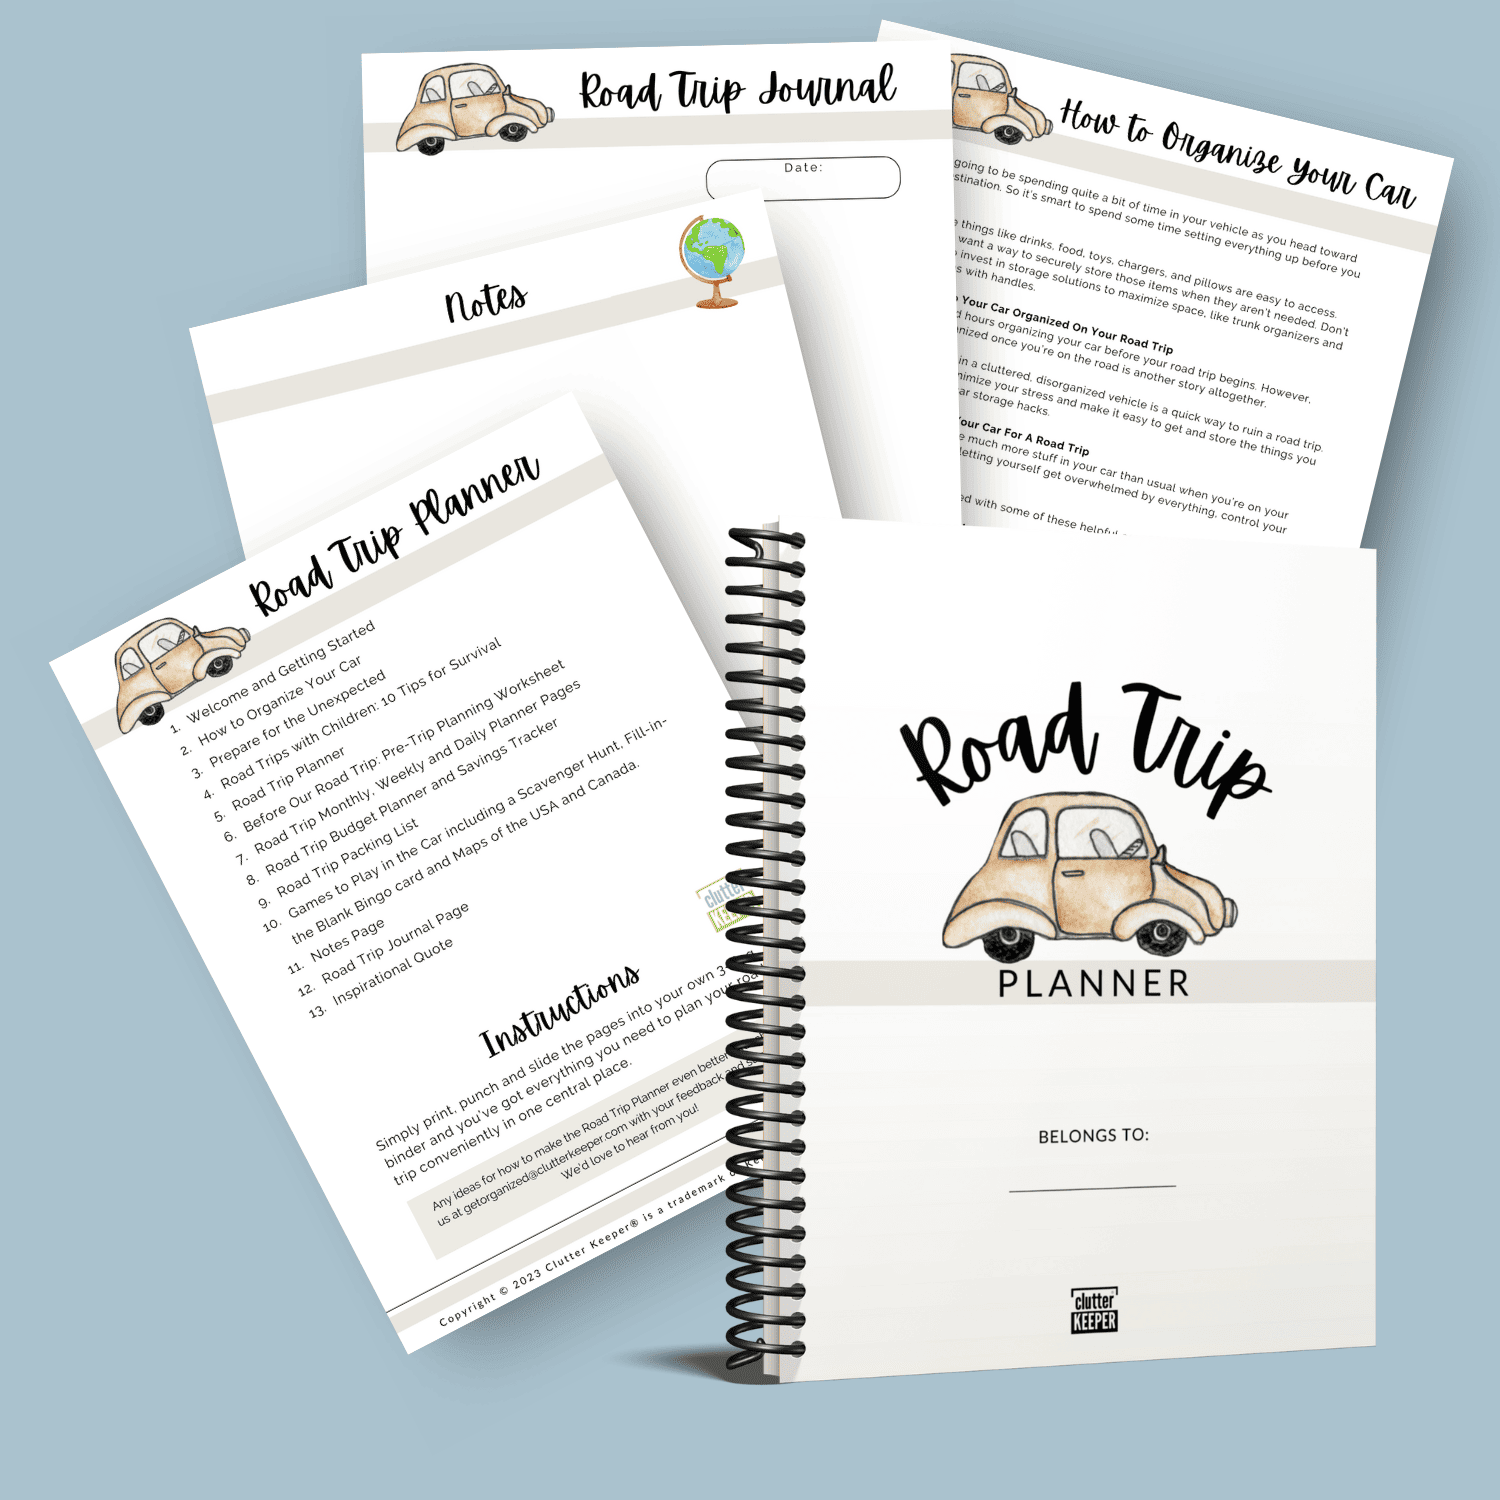 10 Tips for Traveling with Kids  Road trip activities, Road trip